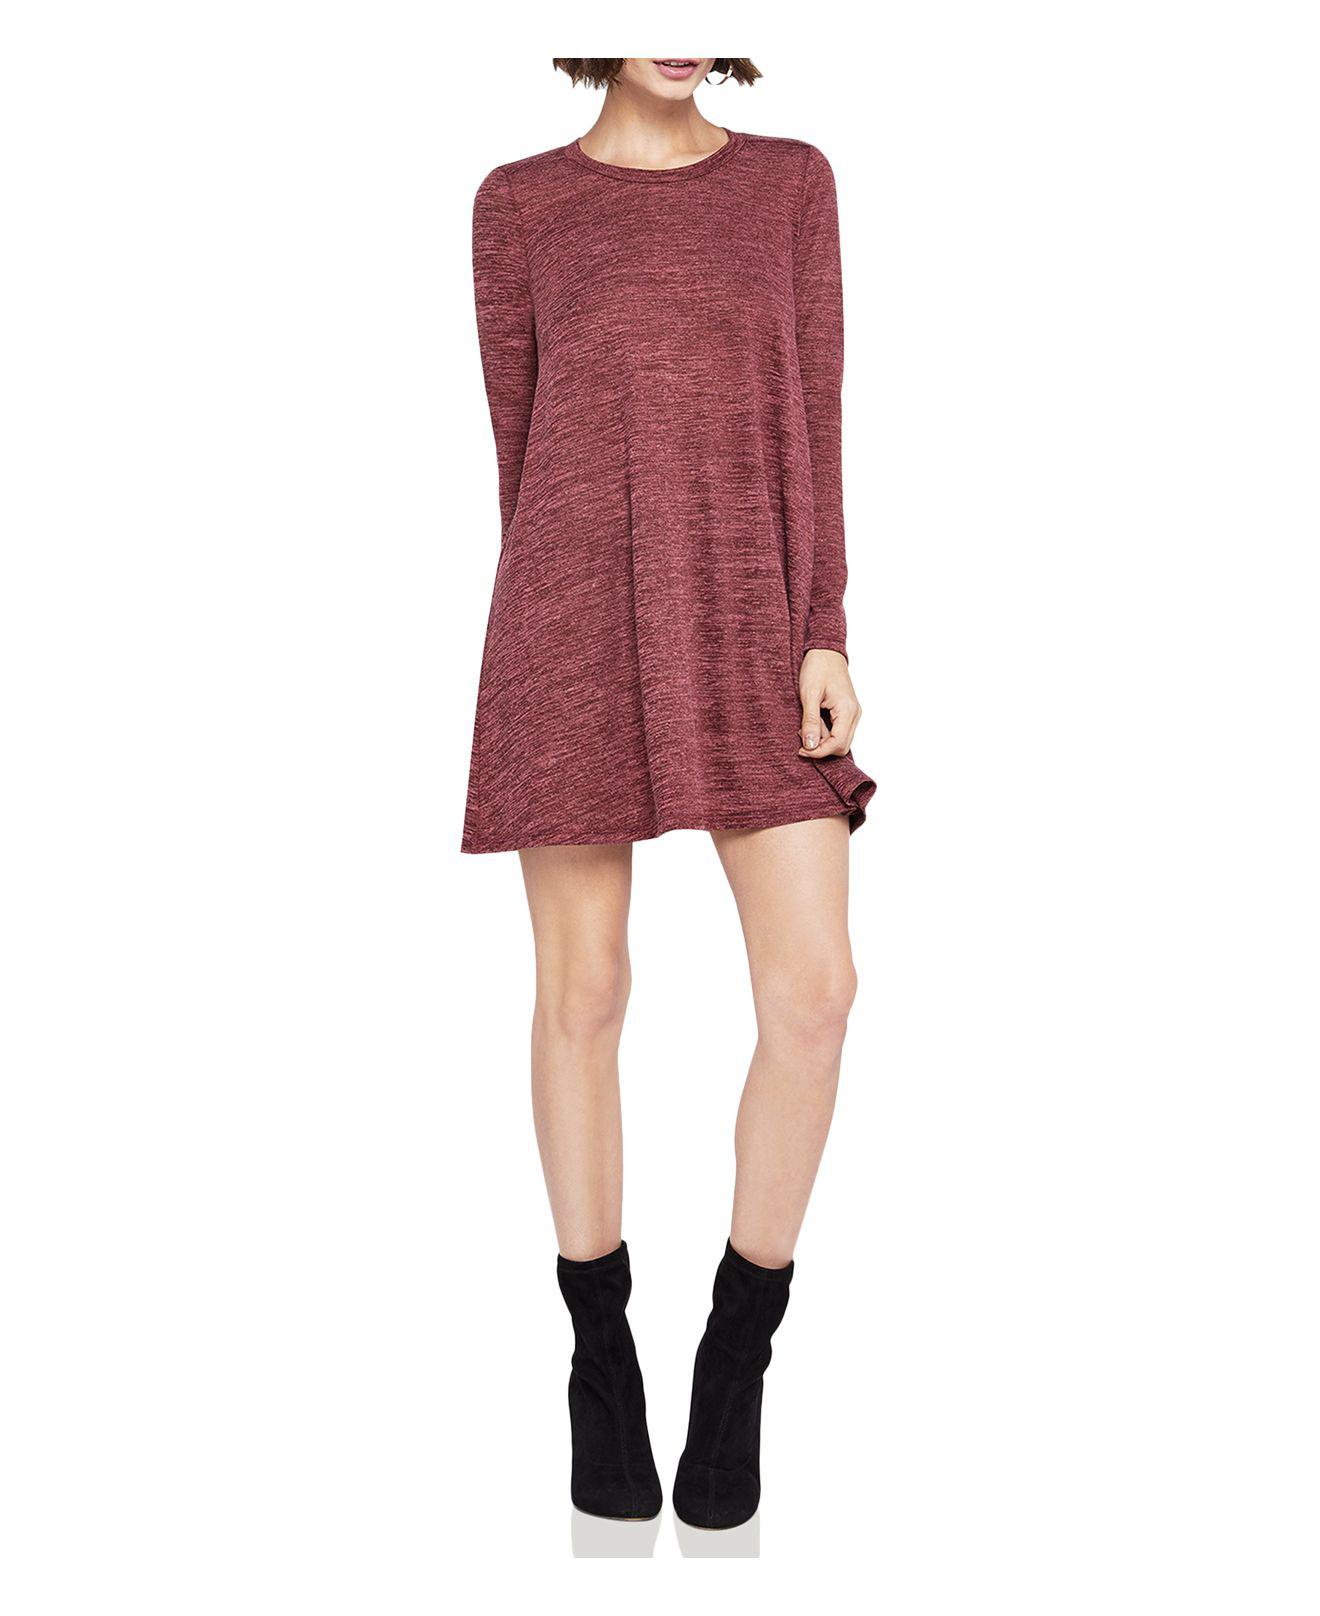 Lyst - Bcbgeneration Long-sleeve A-line Dress in Red